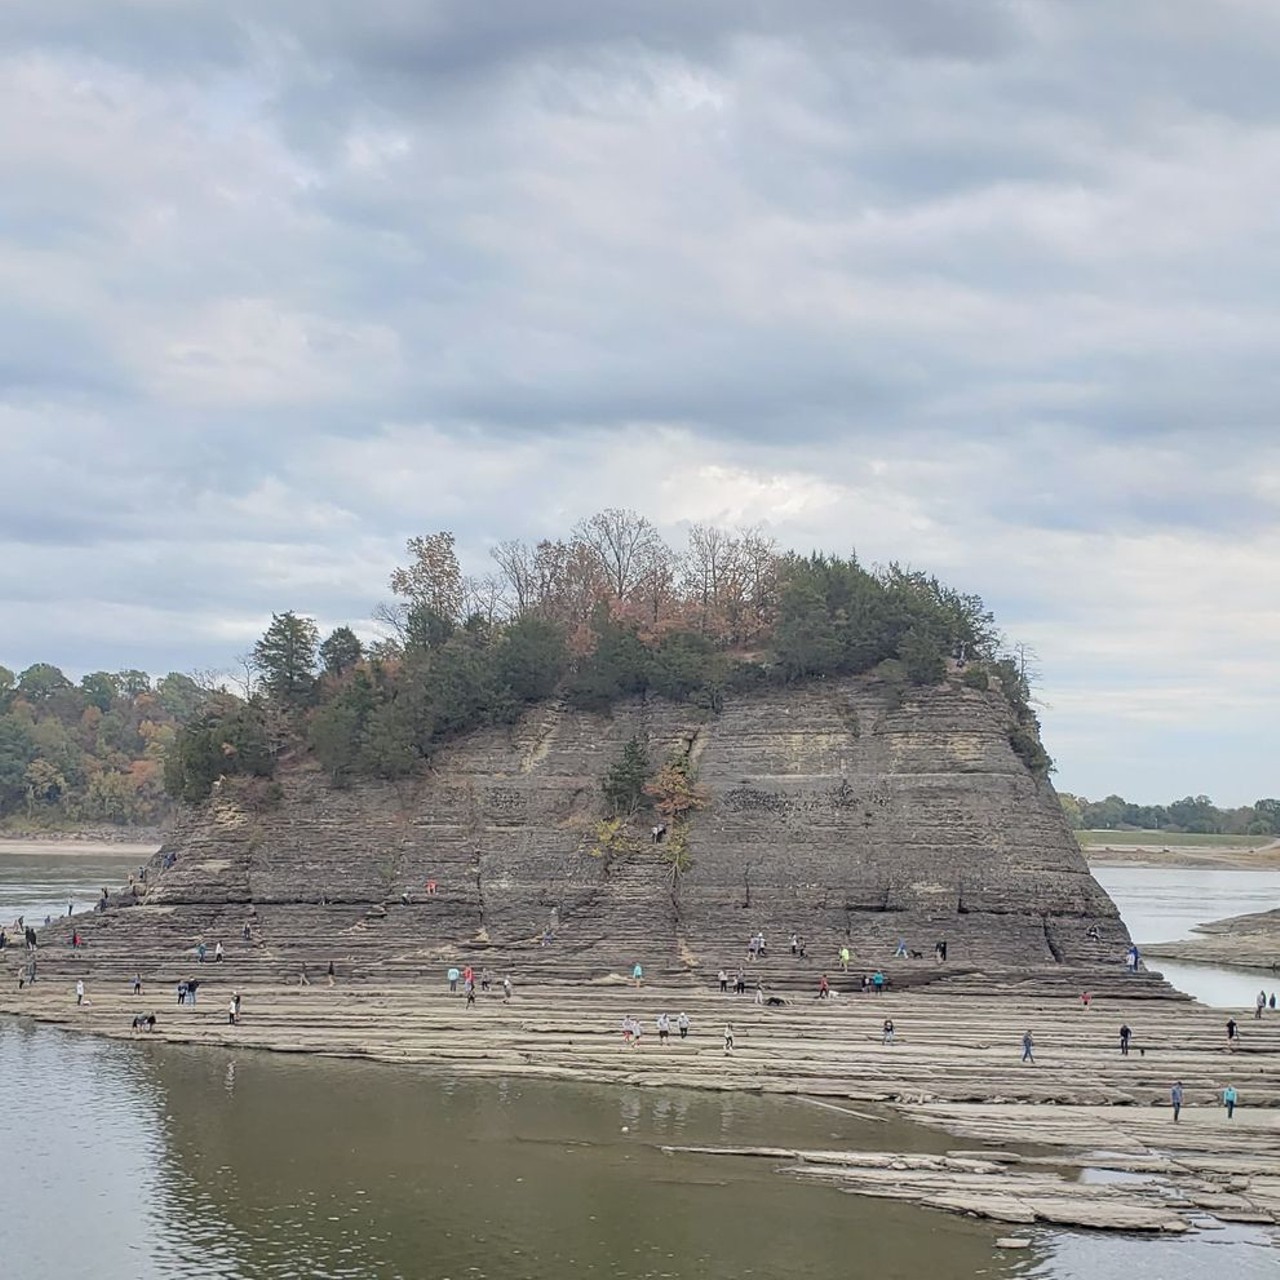 You Can Now Walk to Tower Rock in the Middle of the Mississippi River [PHOTOS]